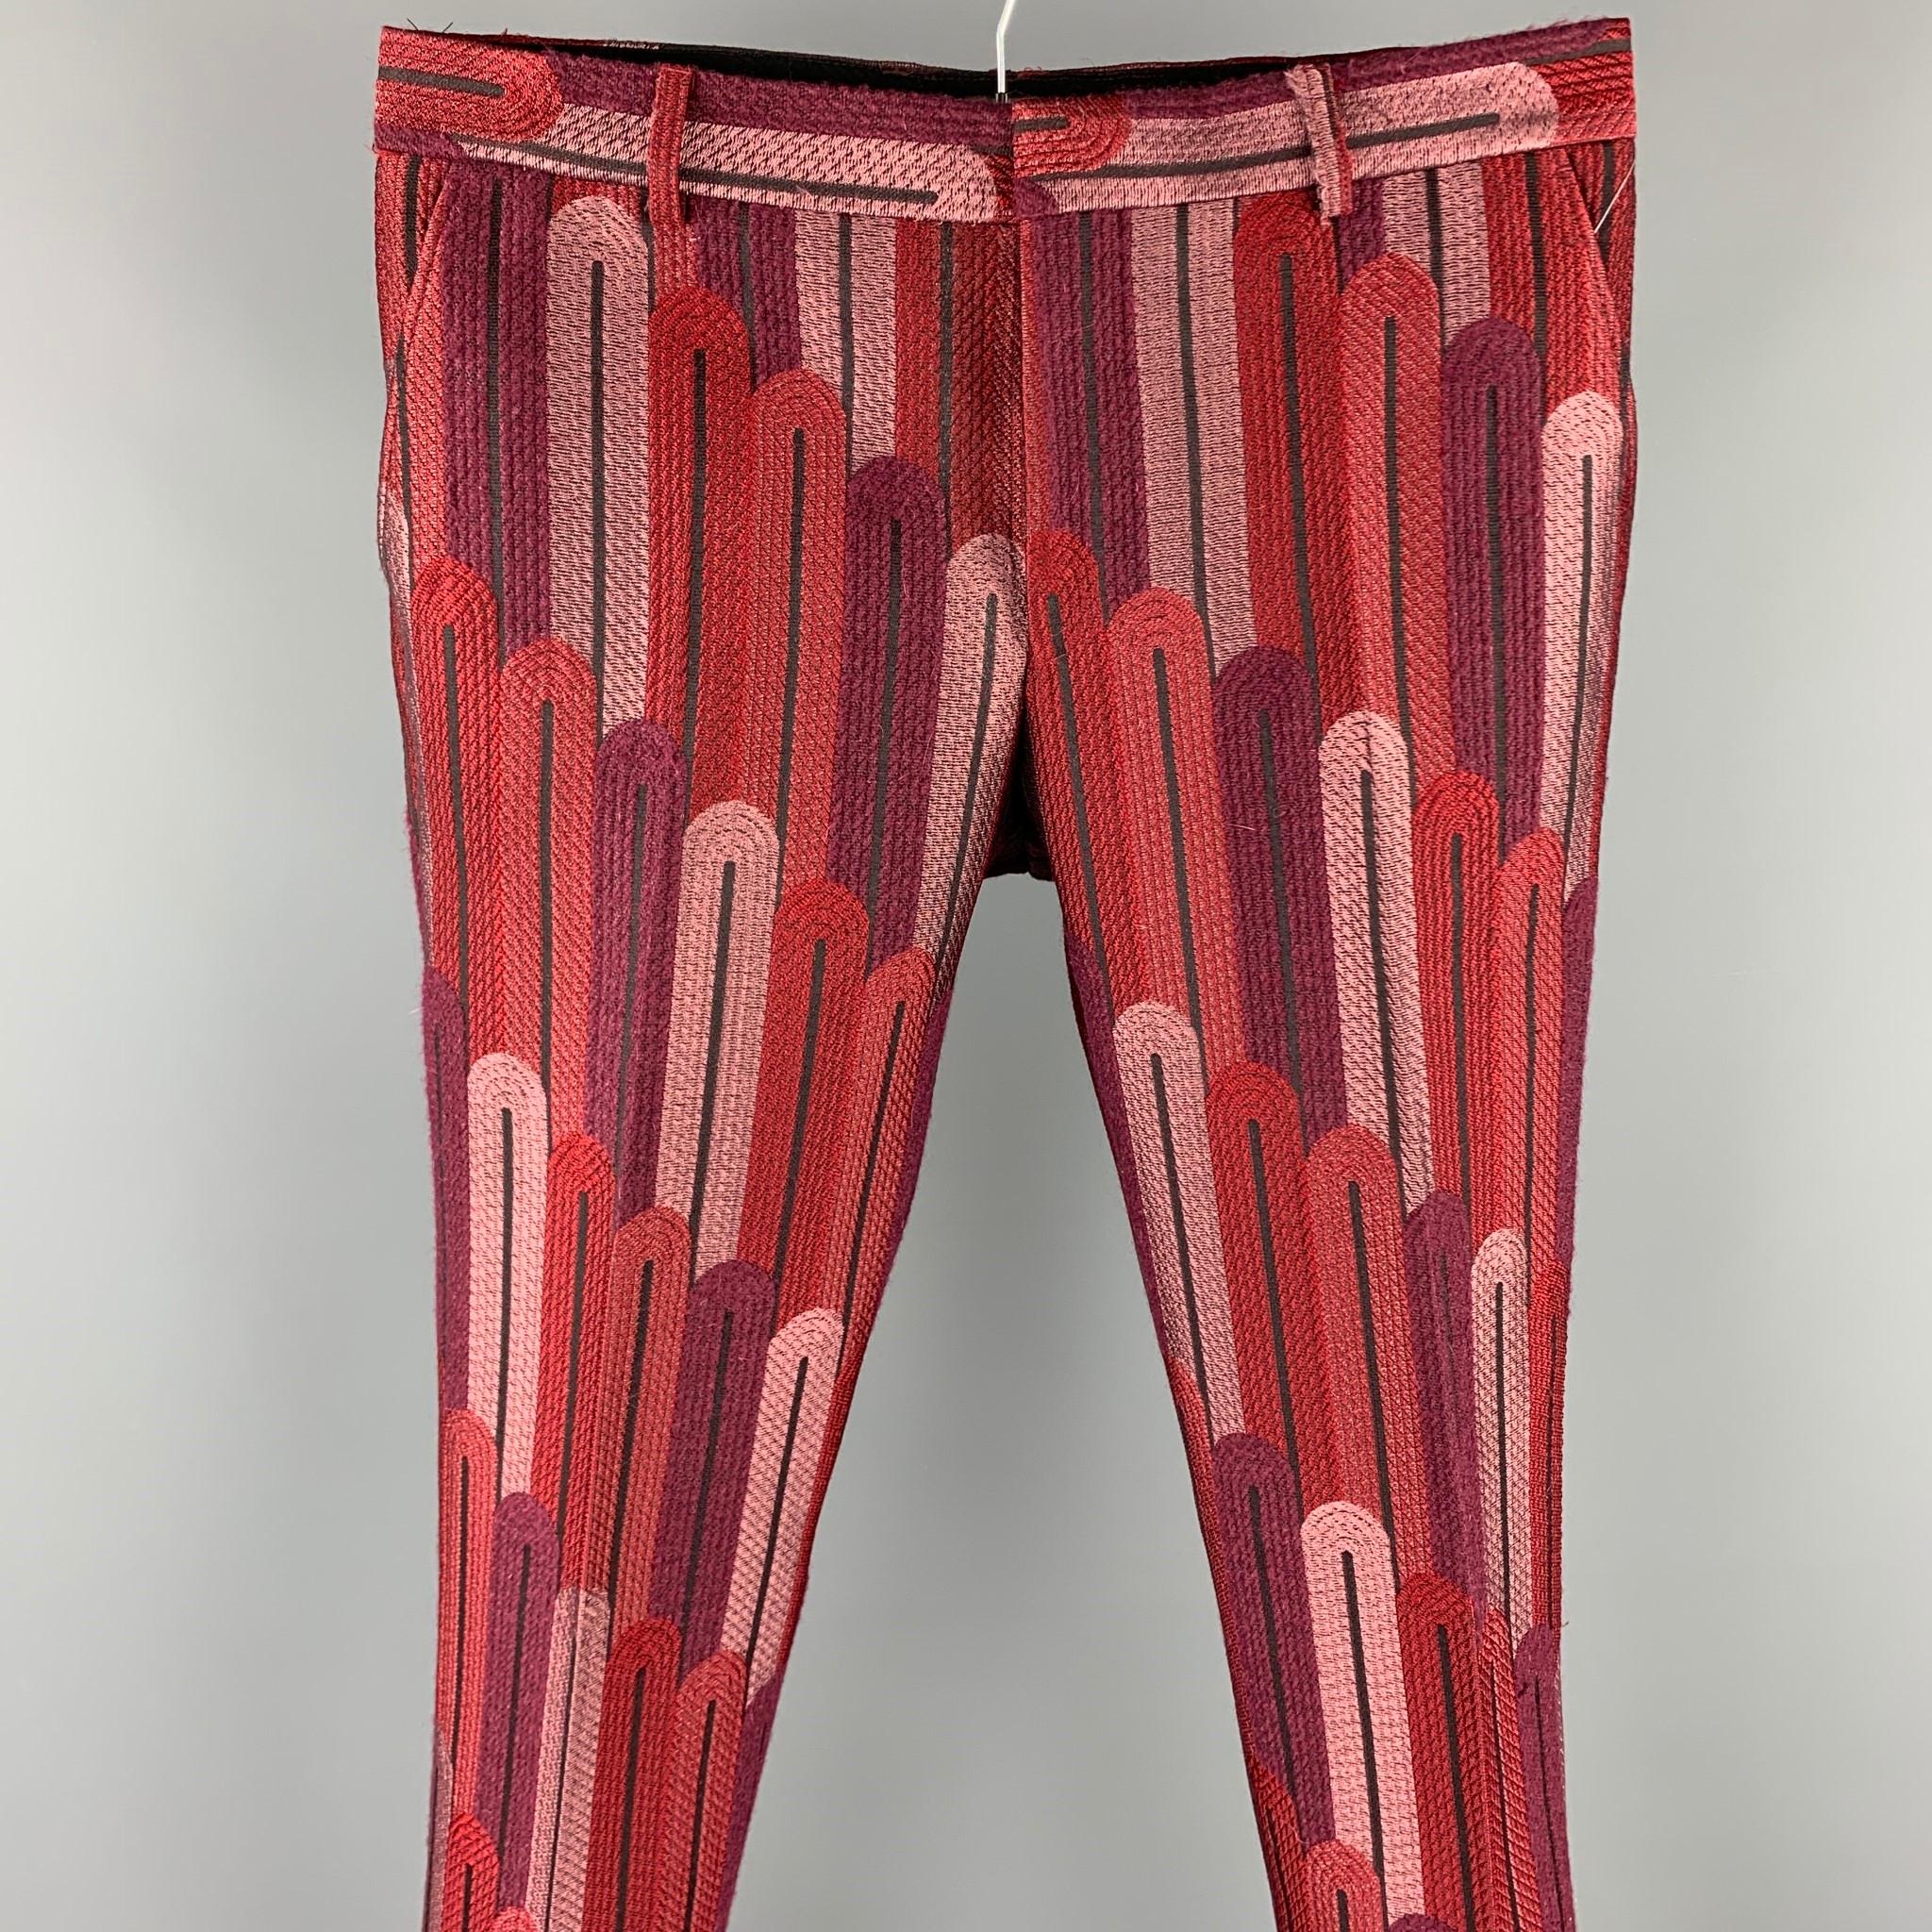 WALTER VAN BEIRENDONCK F/W 16 2001 Sharp Trouser dress pants comes in a burgundy & red brocade polyester blend featuring a flat front, slit pockets, front tab, and a zip fly closure. Altered waistband. Made in Europe.

Excellent Pre-Owned